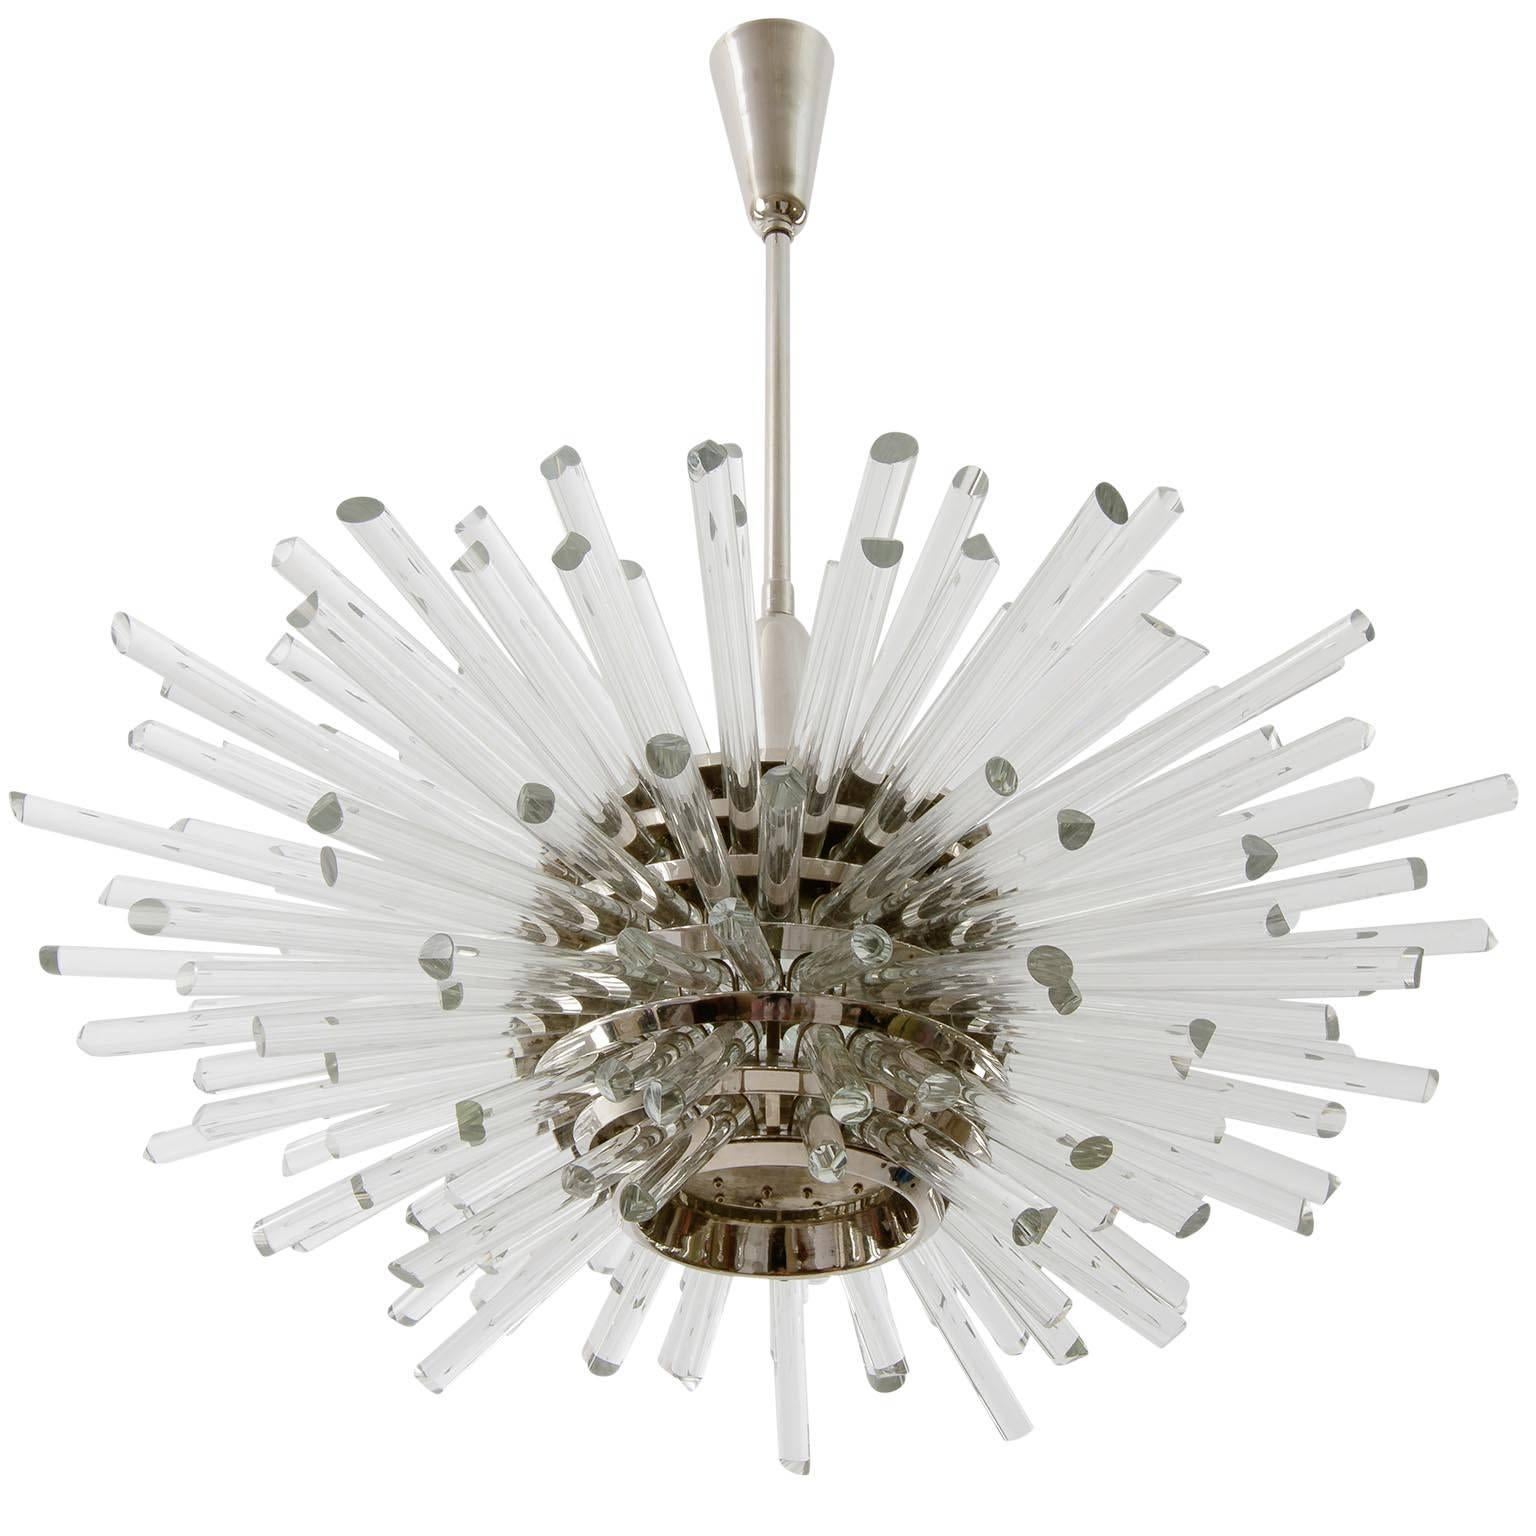 A fantastic Sputnik chandelier by Bakalowits & Söhne, Vienna, Austria, manufactured in midcentury, circa 1970 (late 1960s or early 1970s). 
The fixture consists of a layered multi-tier structure made of nickel-plated brass rings and glass rods with